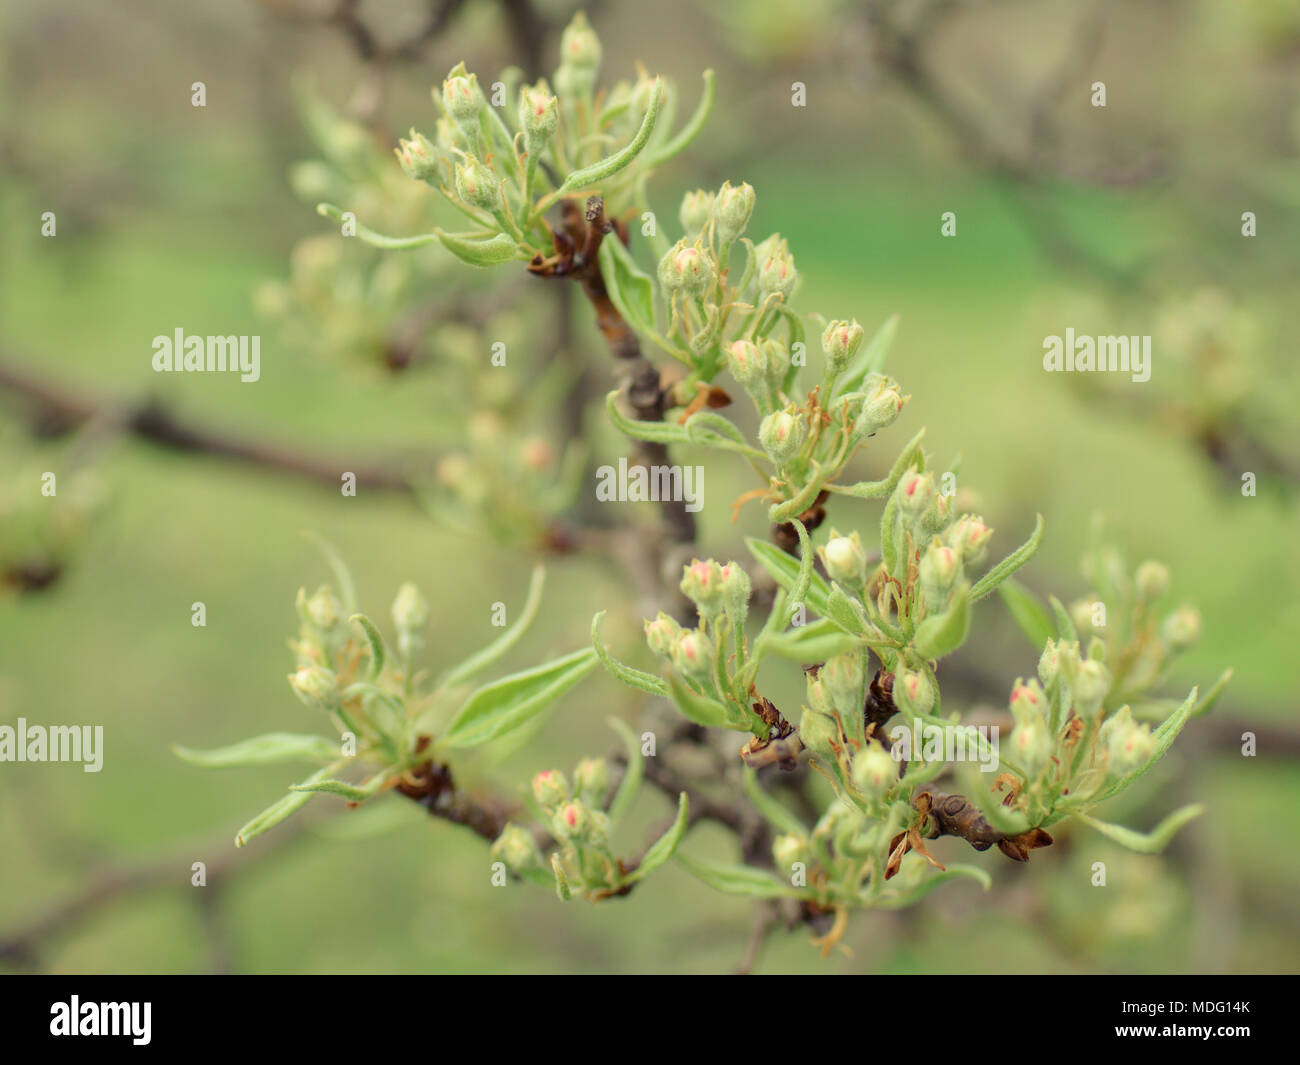 Young leaves and buds of pear tree. Stock Photo